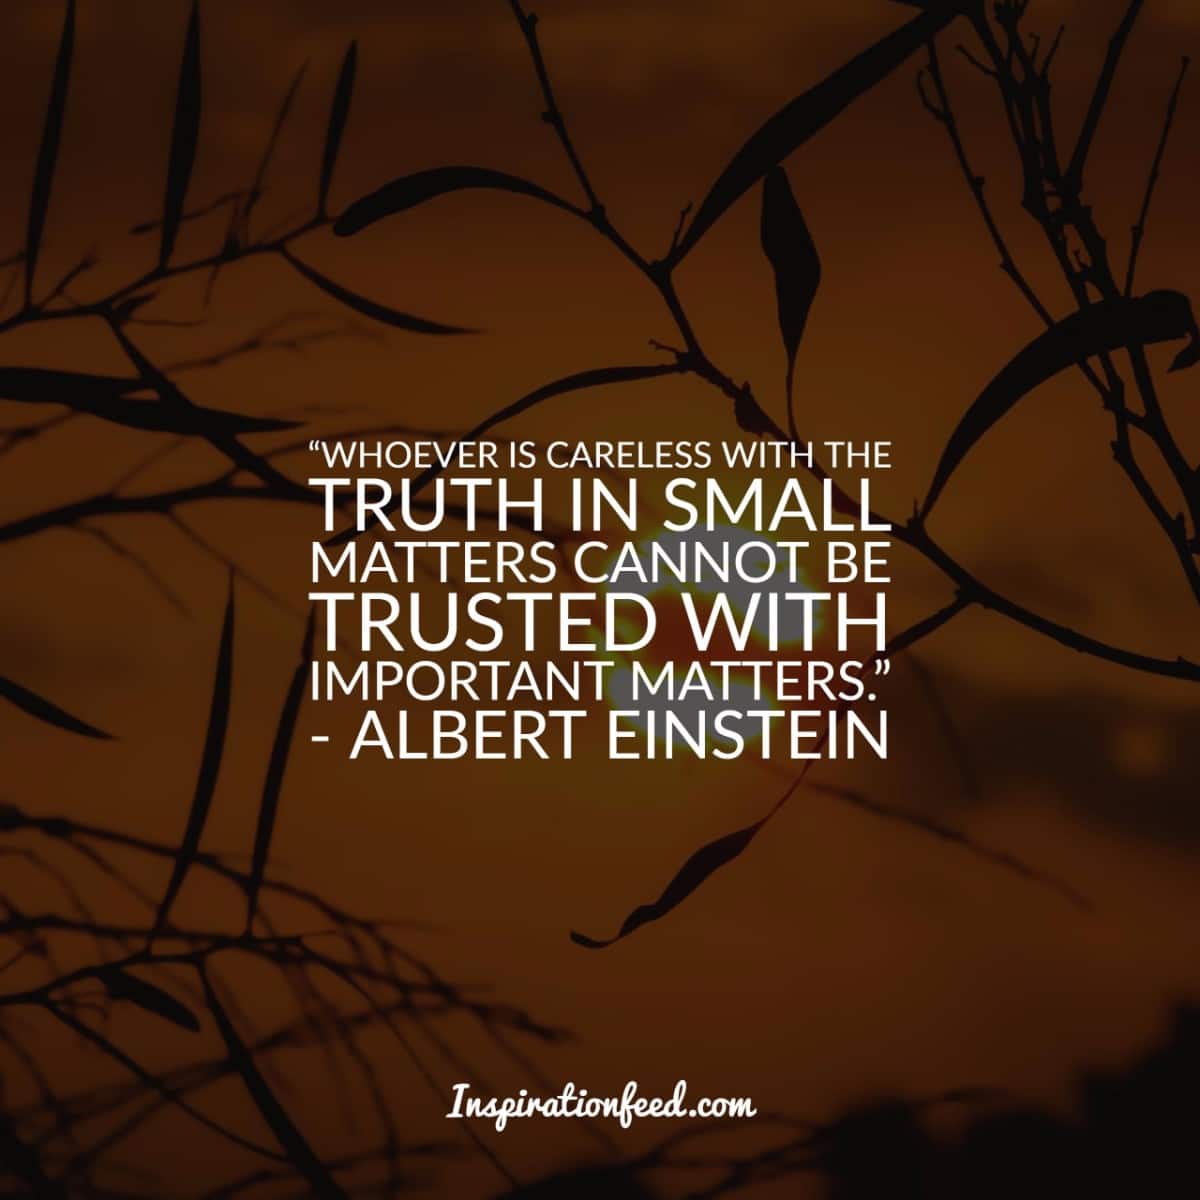 50 Wise Sayings And Quotes About Trust - Inspirationfeed